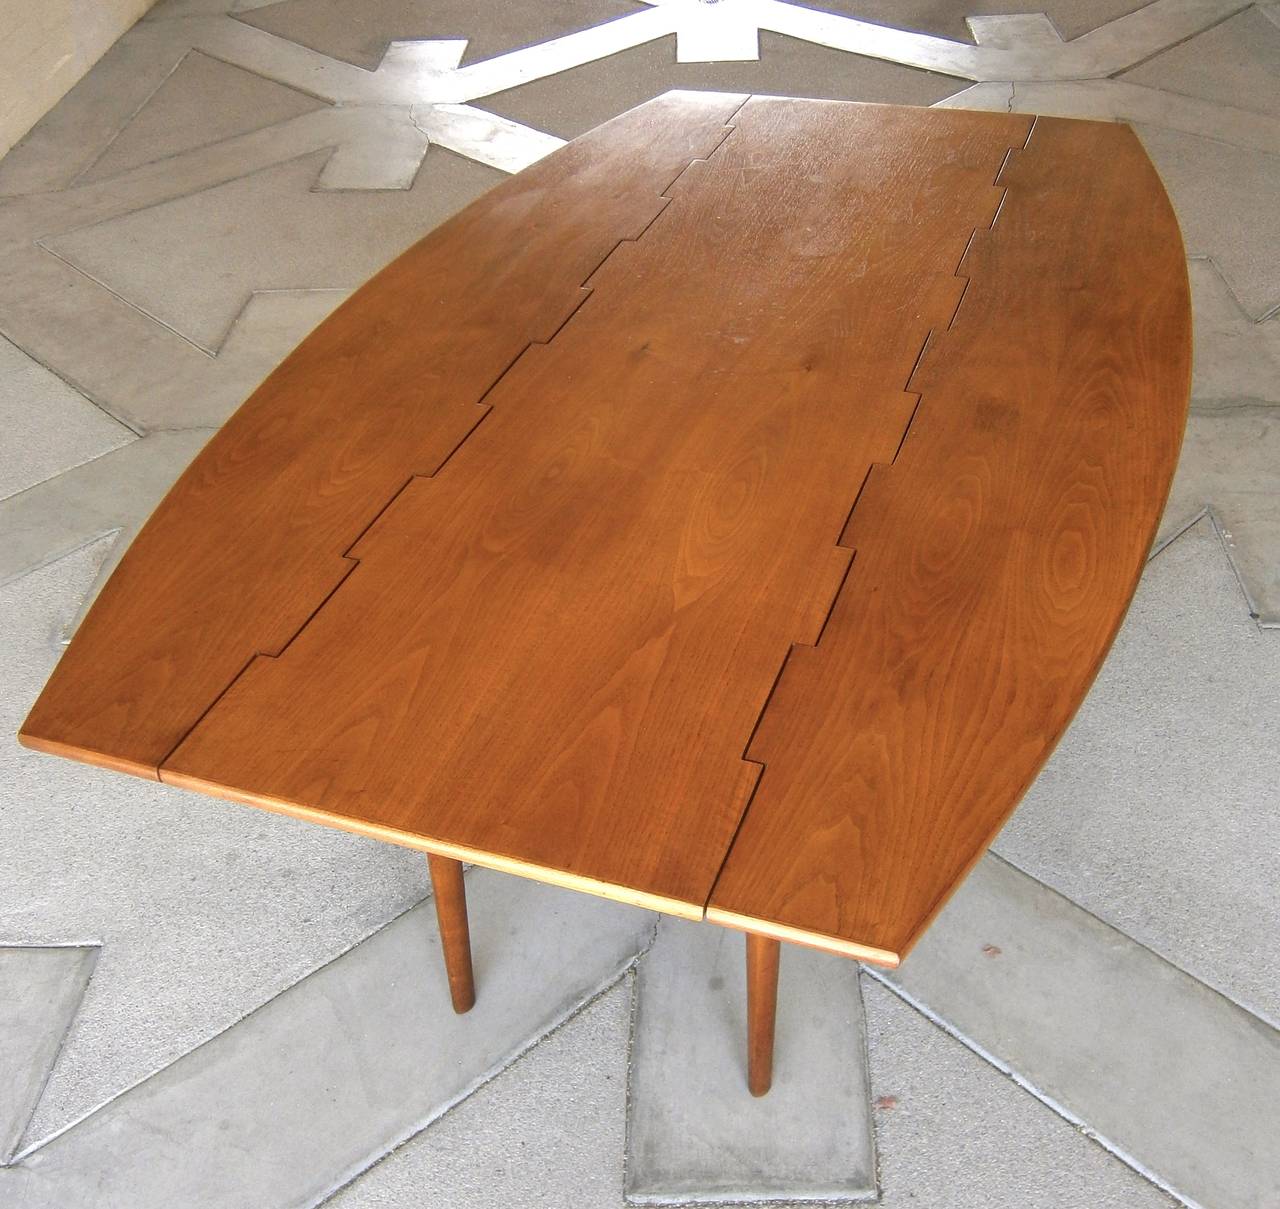 A walnut drop-leaf dining table designed in the 1960s by Barney Flagg for Drexel Furniture's 